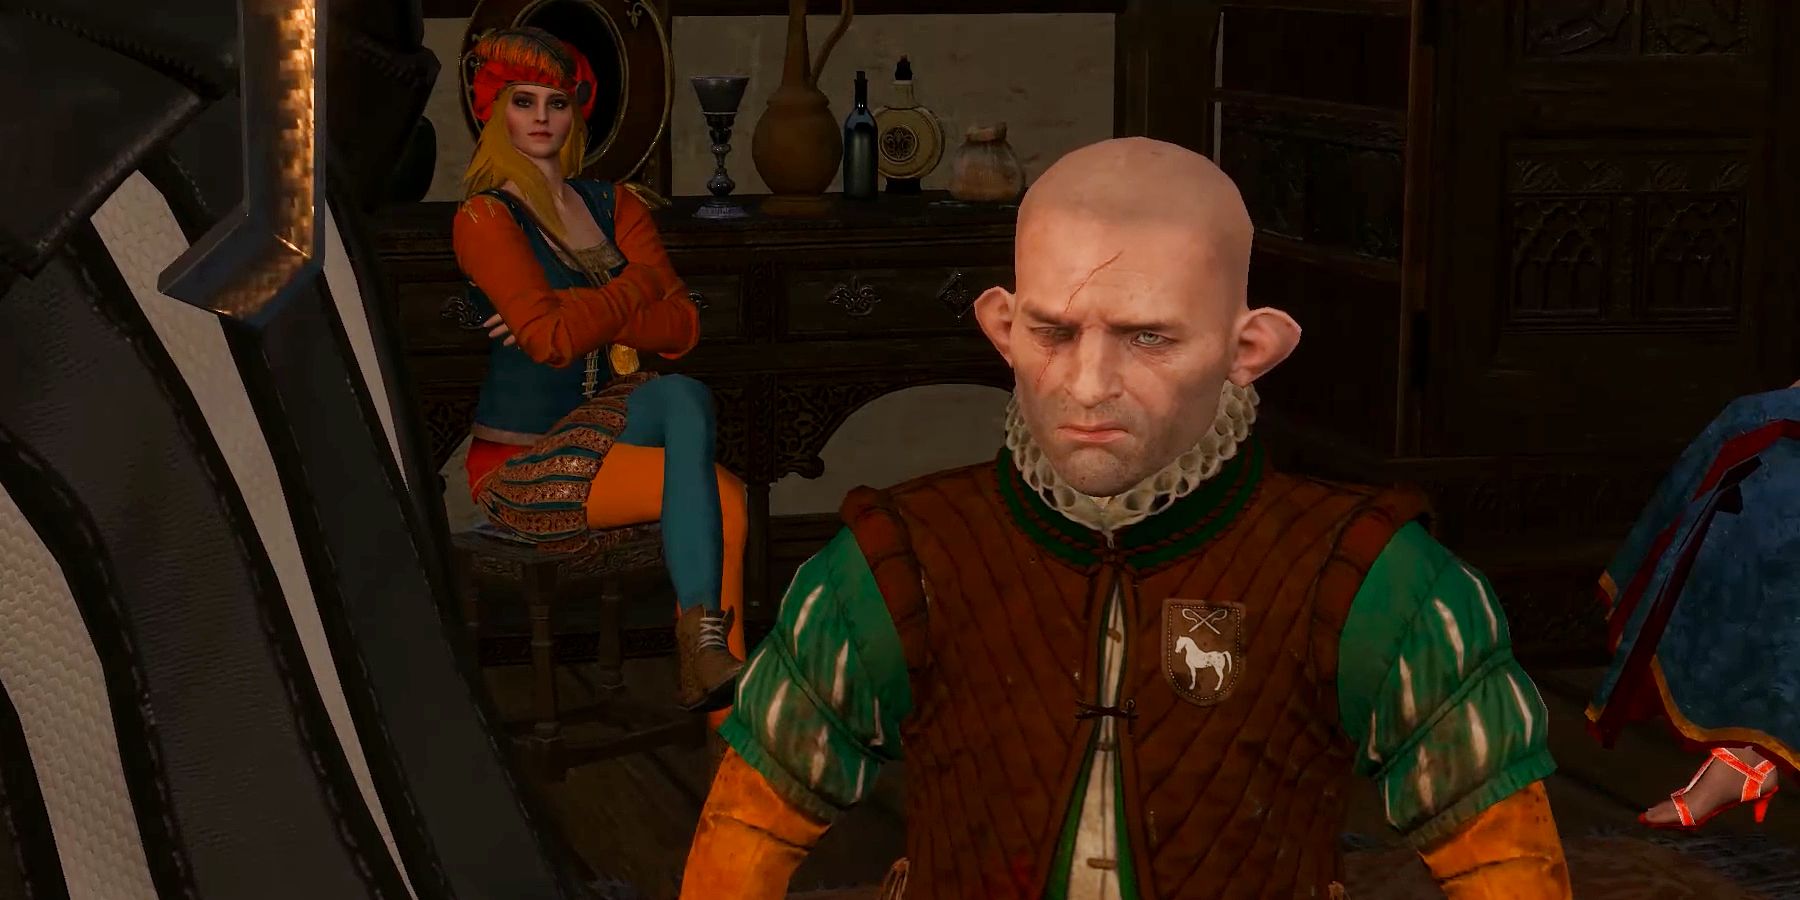 The Witcher 3: Dopplers Copy More Than Just Physical Appearance